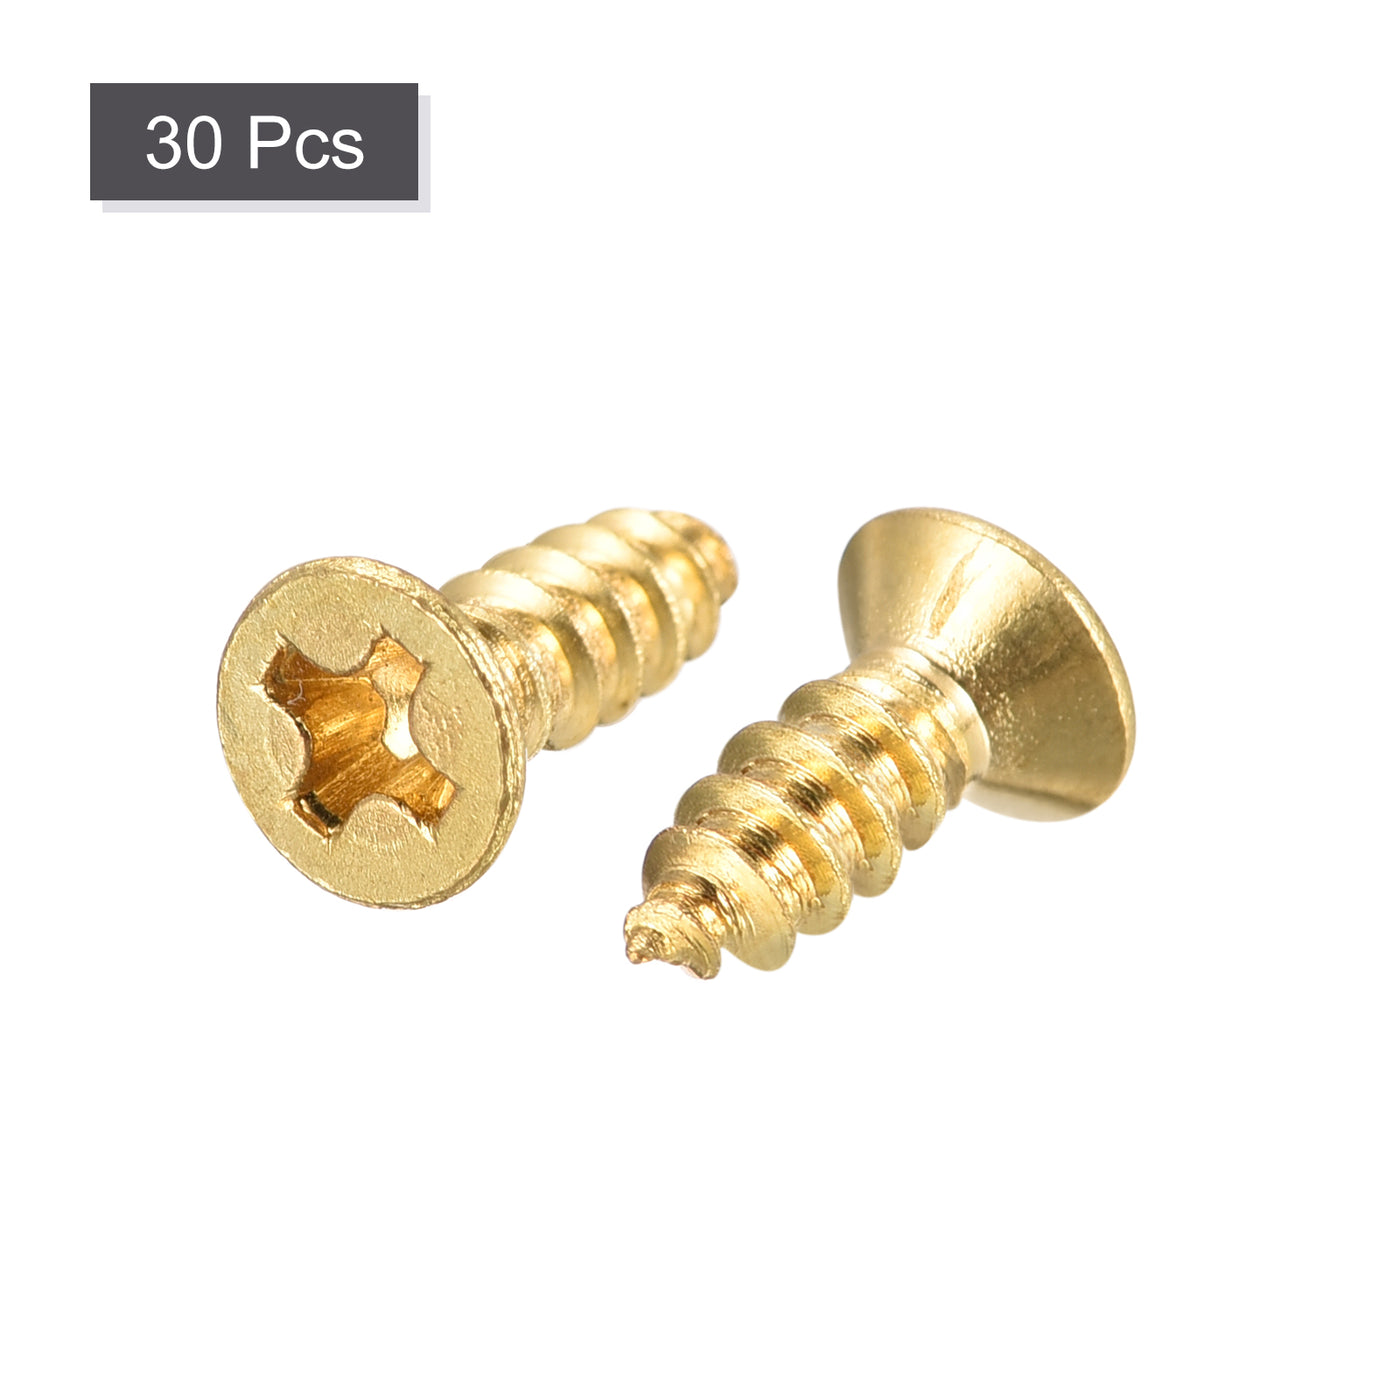 uxcell Uxcell Brass Wood Screws, M3x10mm Phillips Flat Head Self Tapping Connector for Door, Cabinet, Wooden Furniture 30Pcs